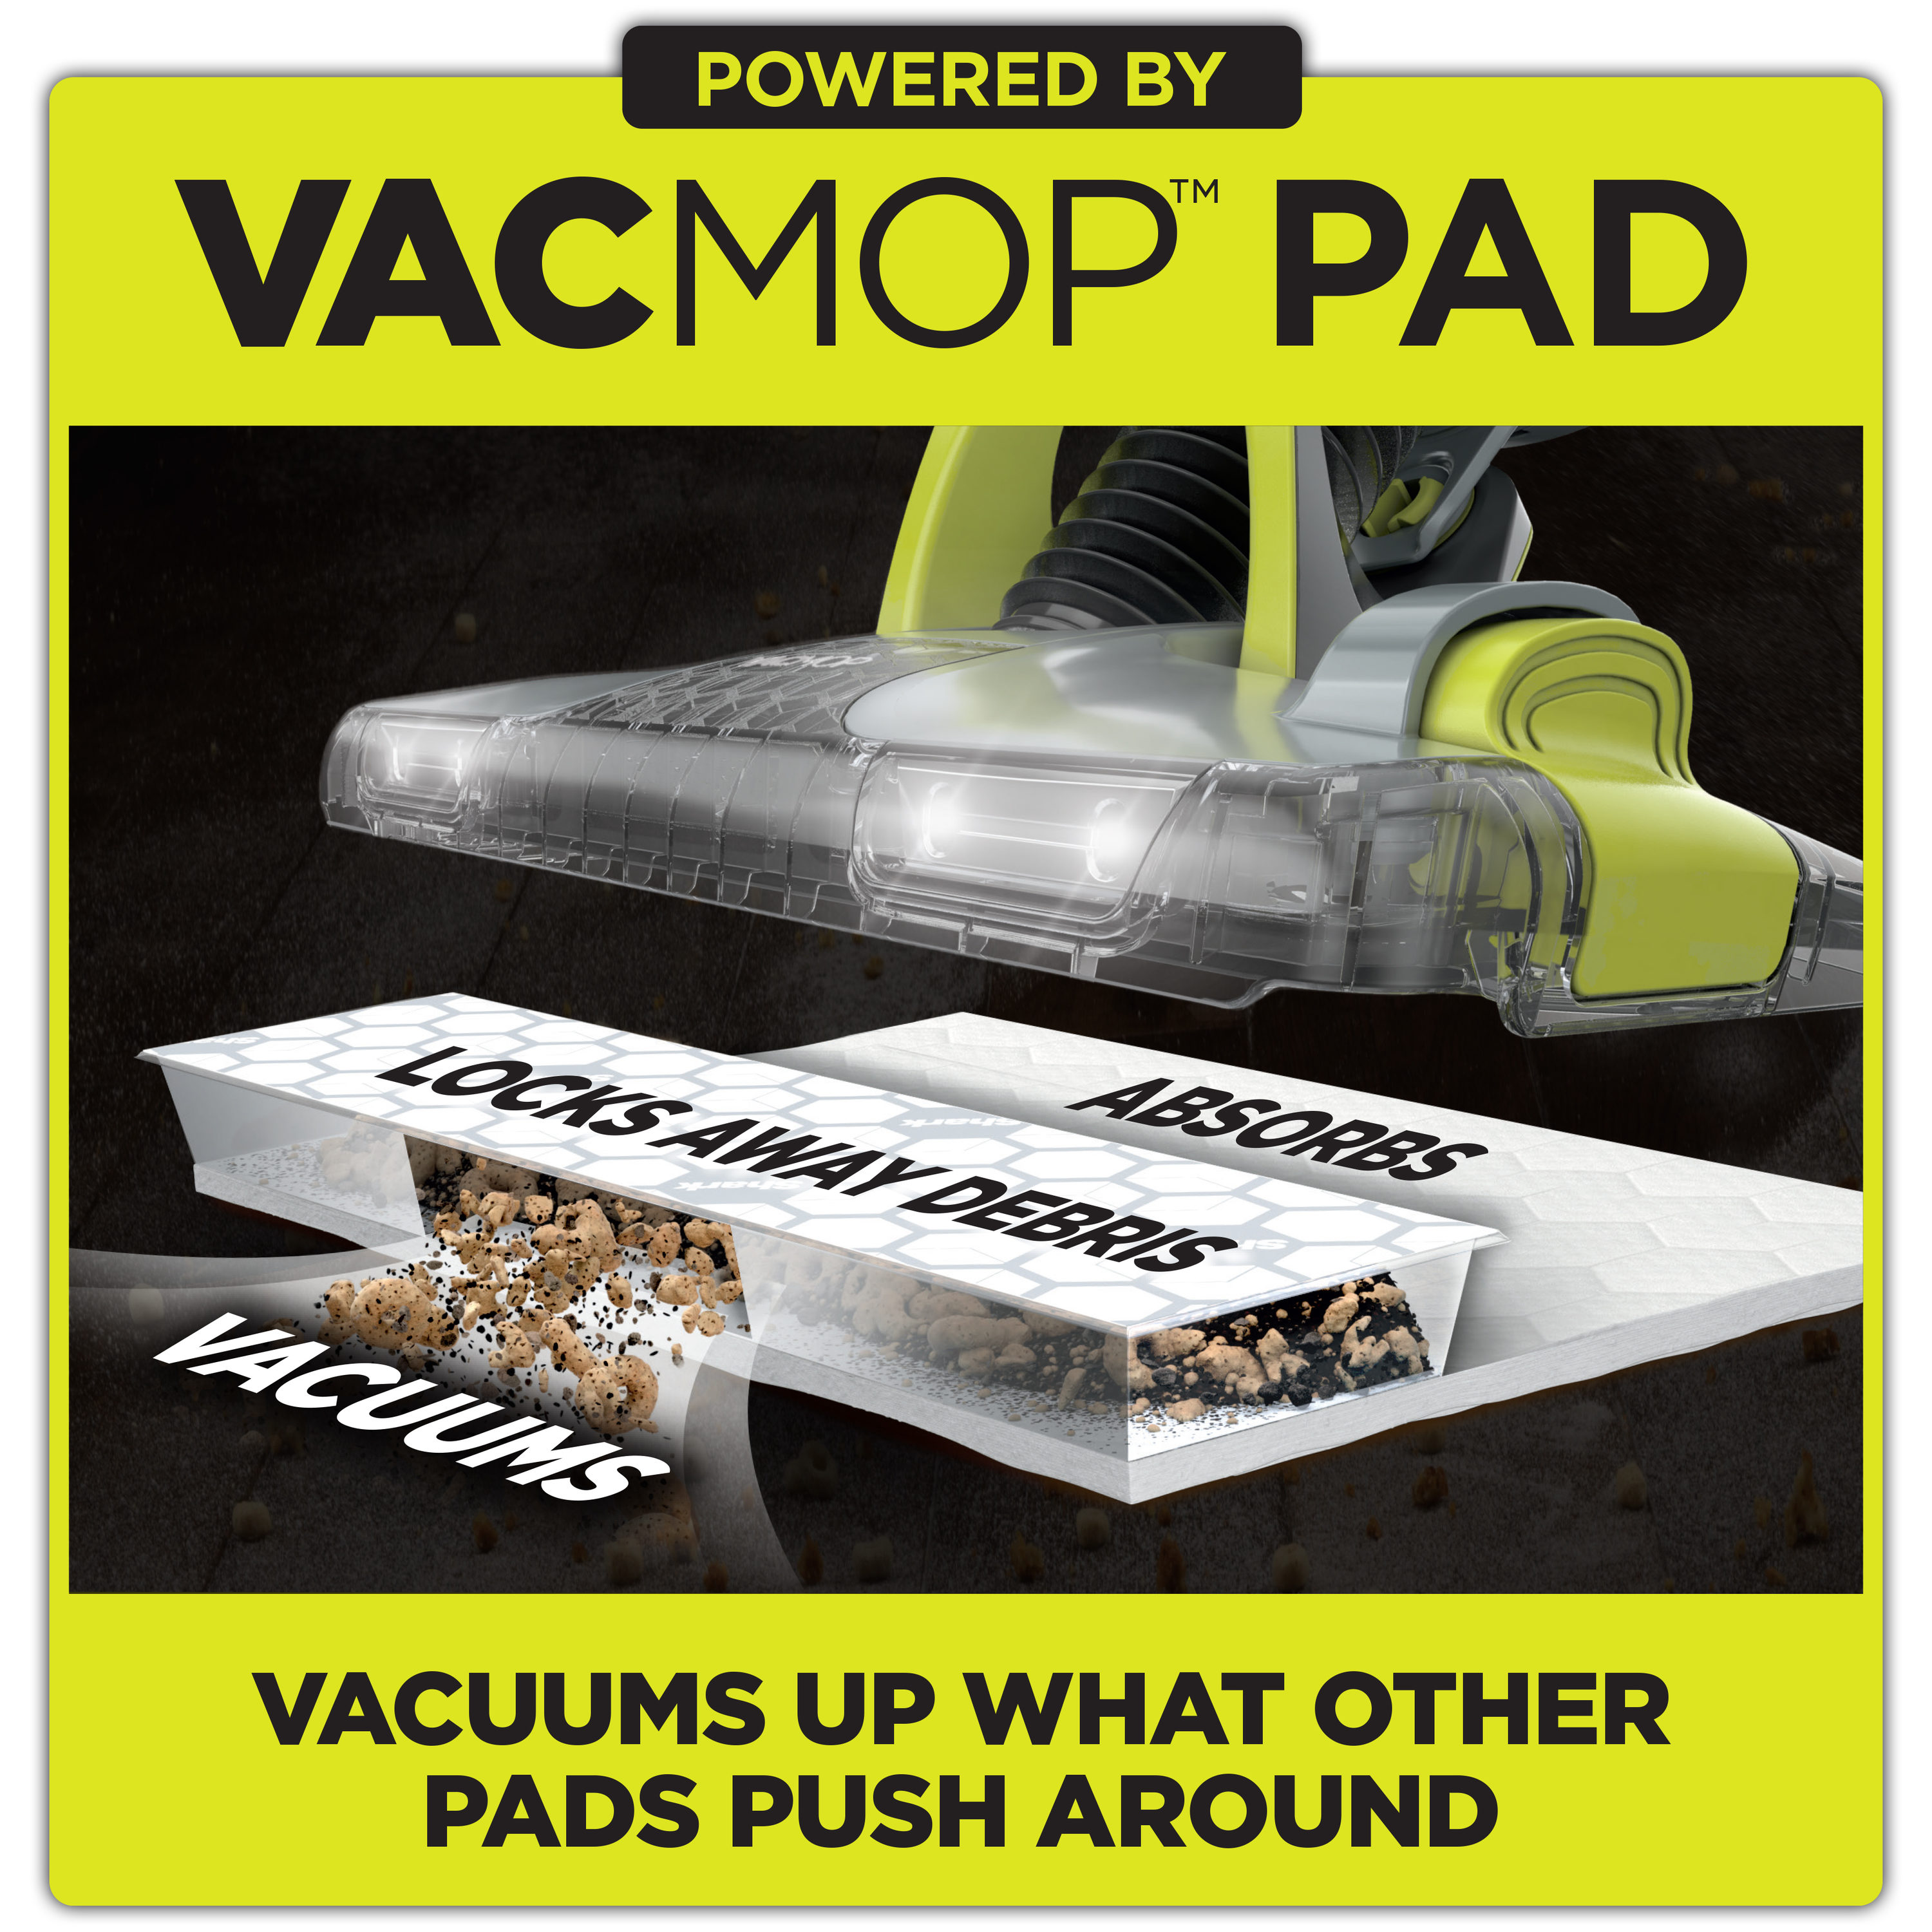 Shark VacMop Pro Review After Two Years of Use